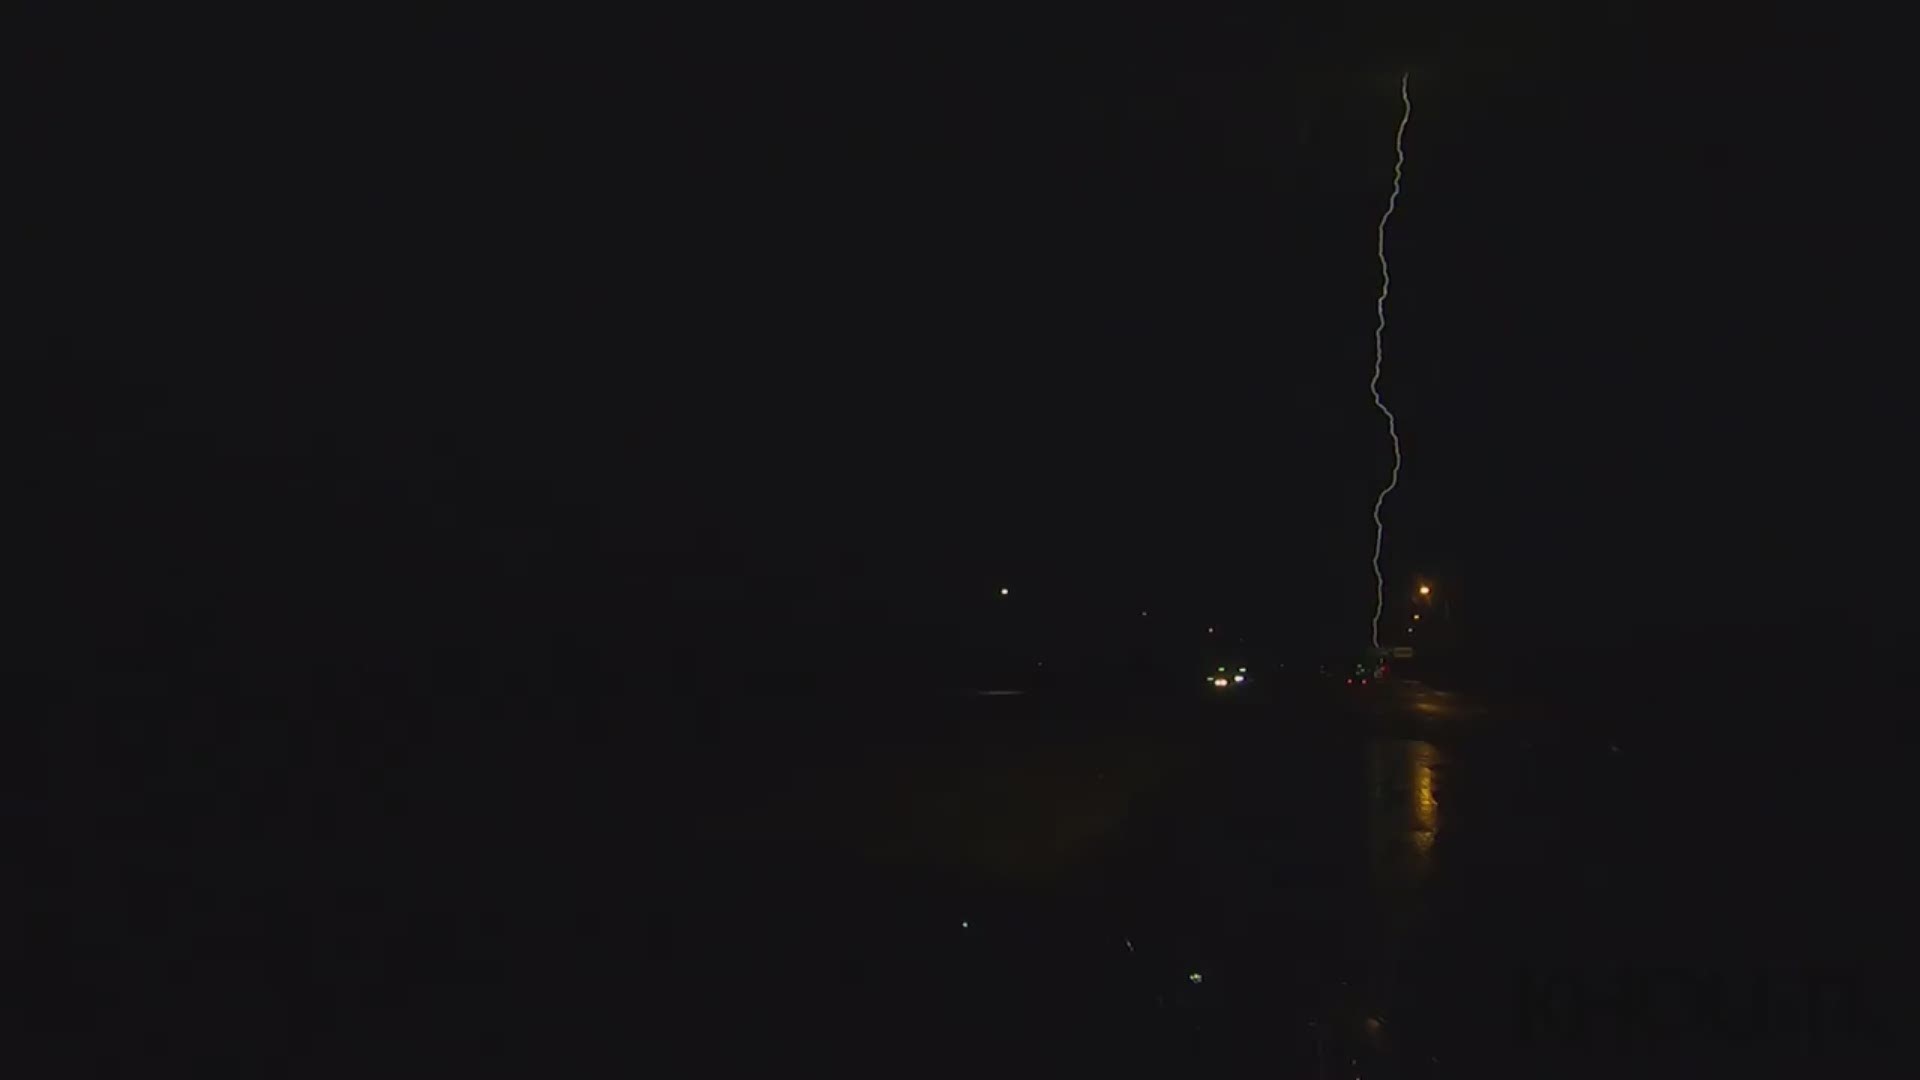 Incredible video from reporter Brett Buffington of some of the intense lightning the Houston area received overnight. The first bolt appears to hit the same spot over and over for nearly 8 seconds. (Video was shot in high speed so it appears slower on camera.)